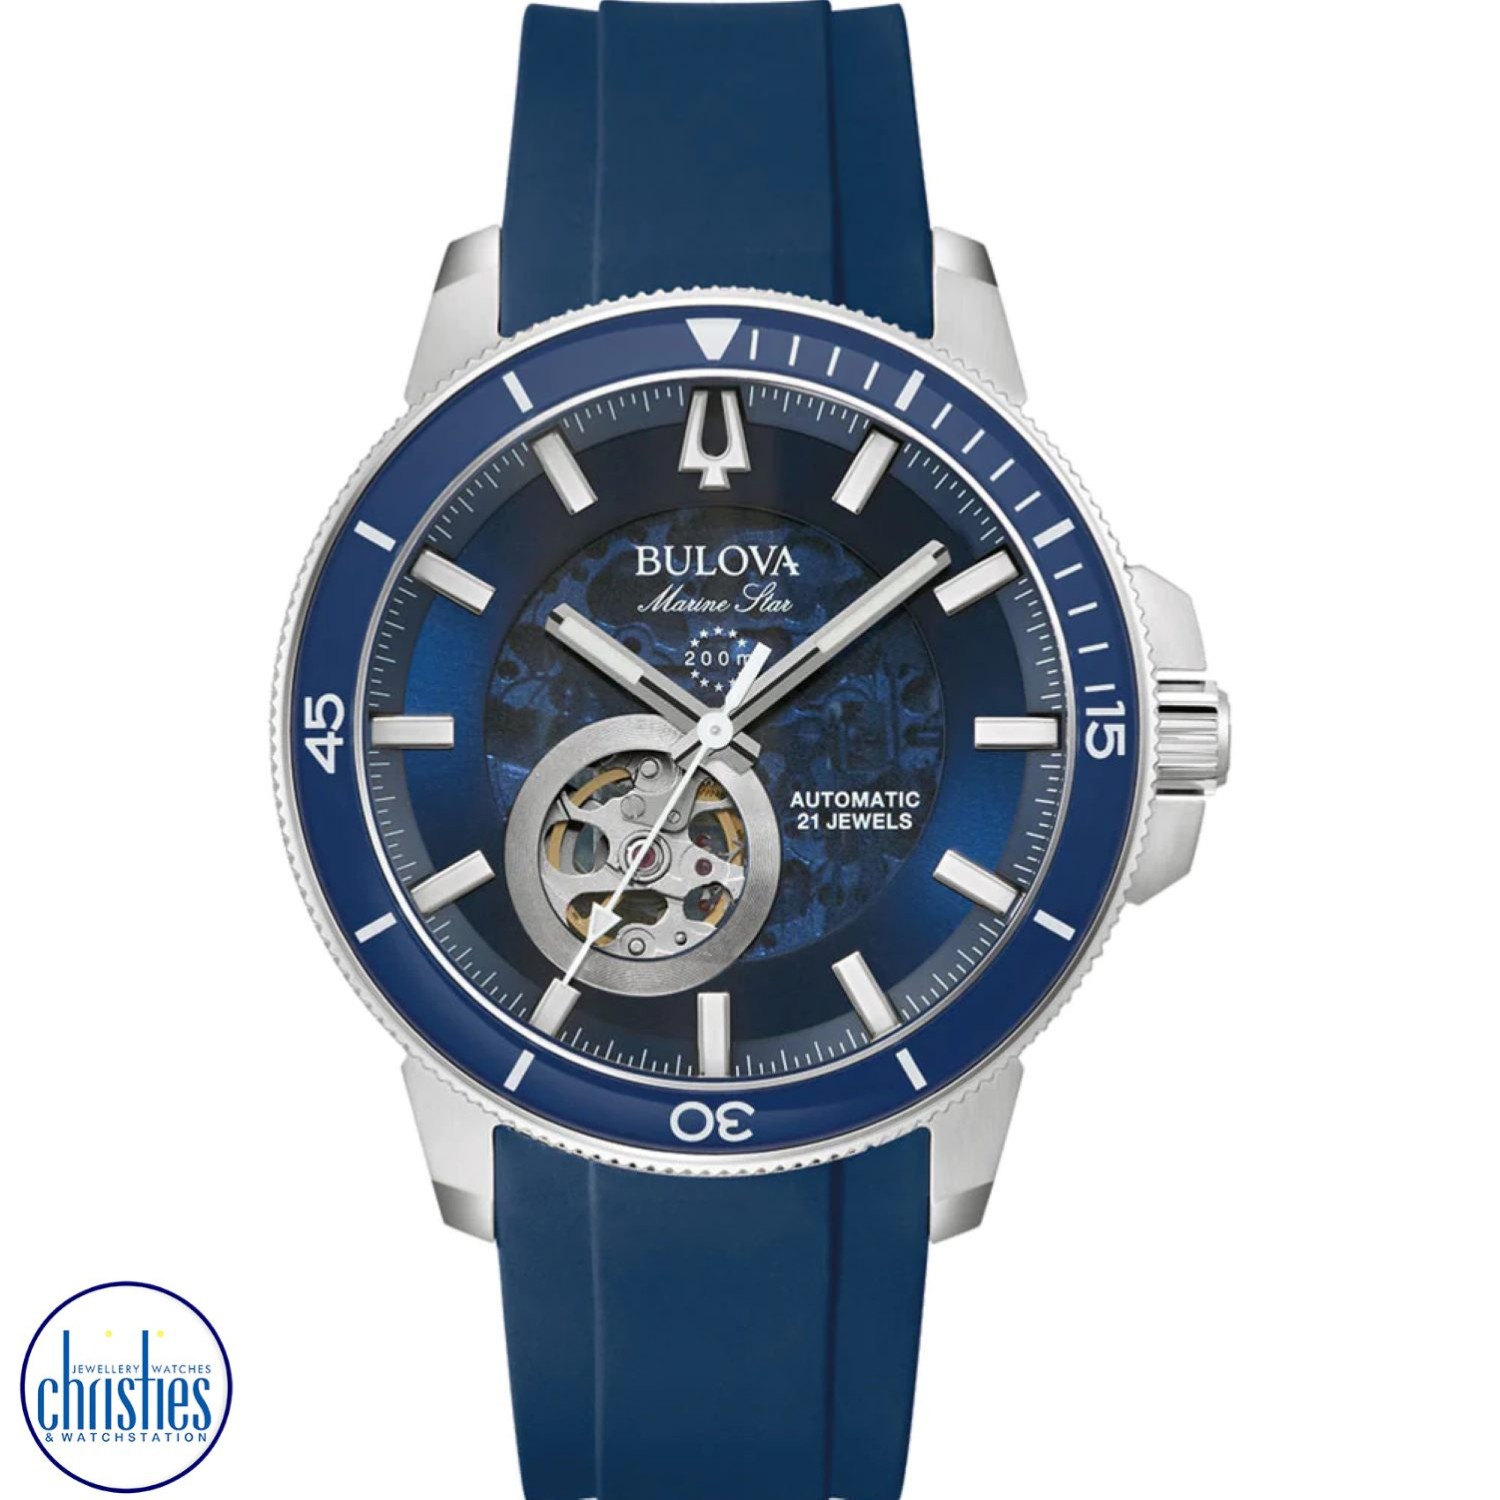 96A303 Bulova Men's Marine Star Automatic Watch. The Bulova Men's Marine Star Automatic Watch 96A303 is a stylish and functional timepiece designed for men.